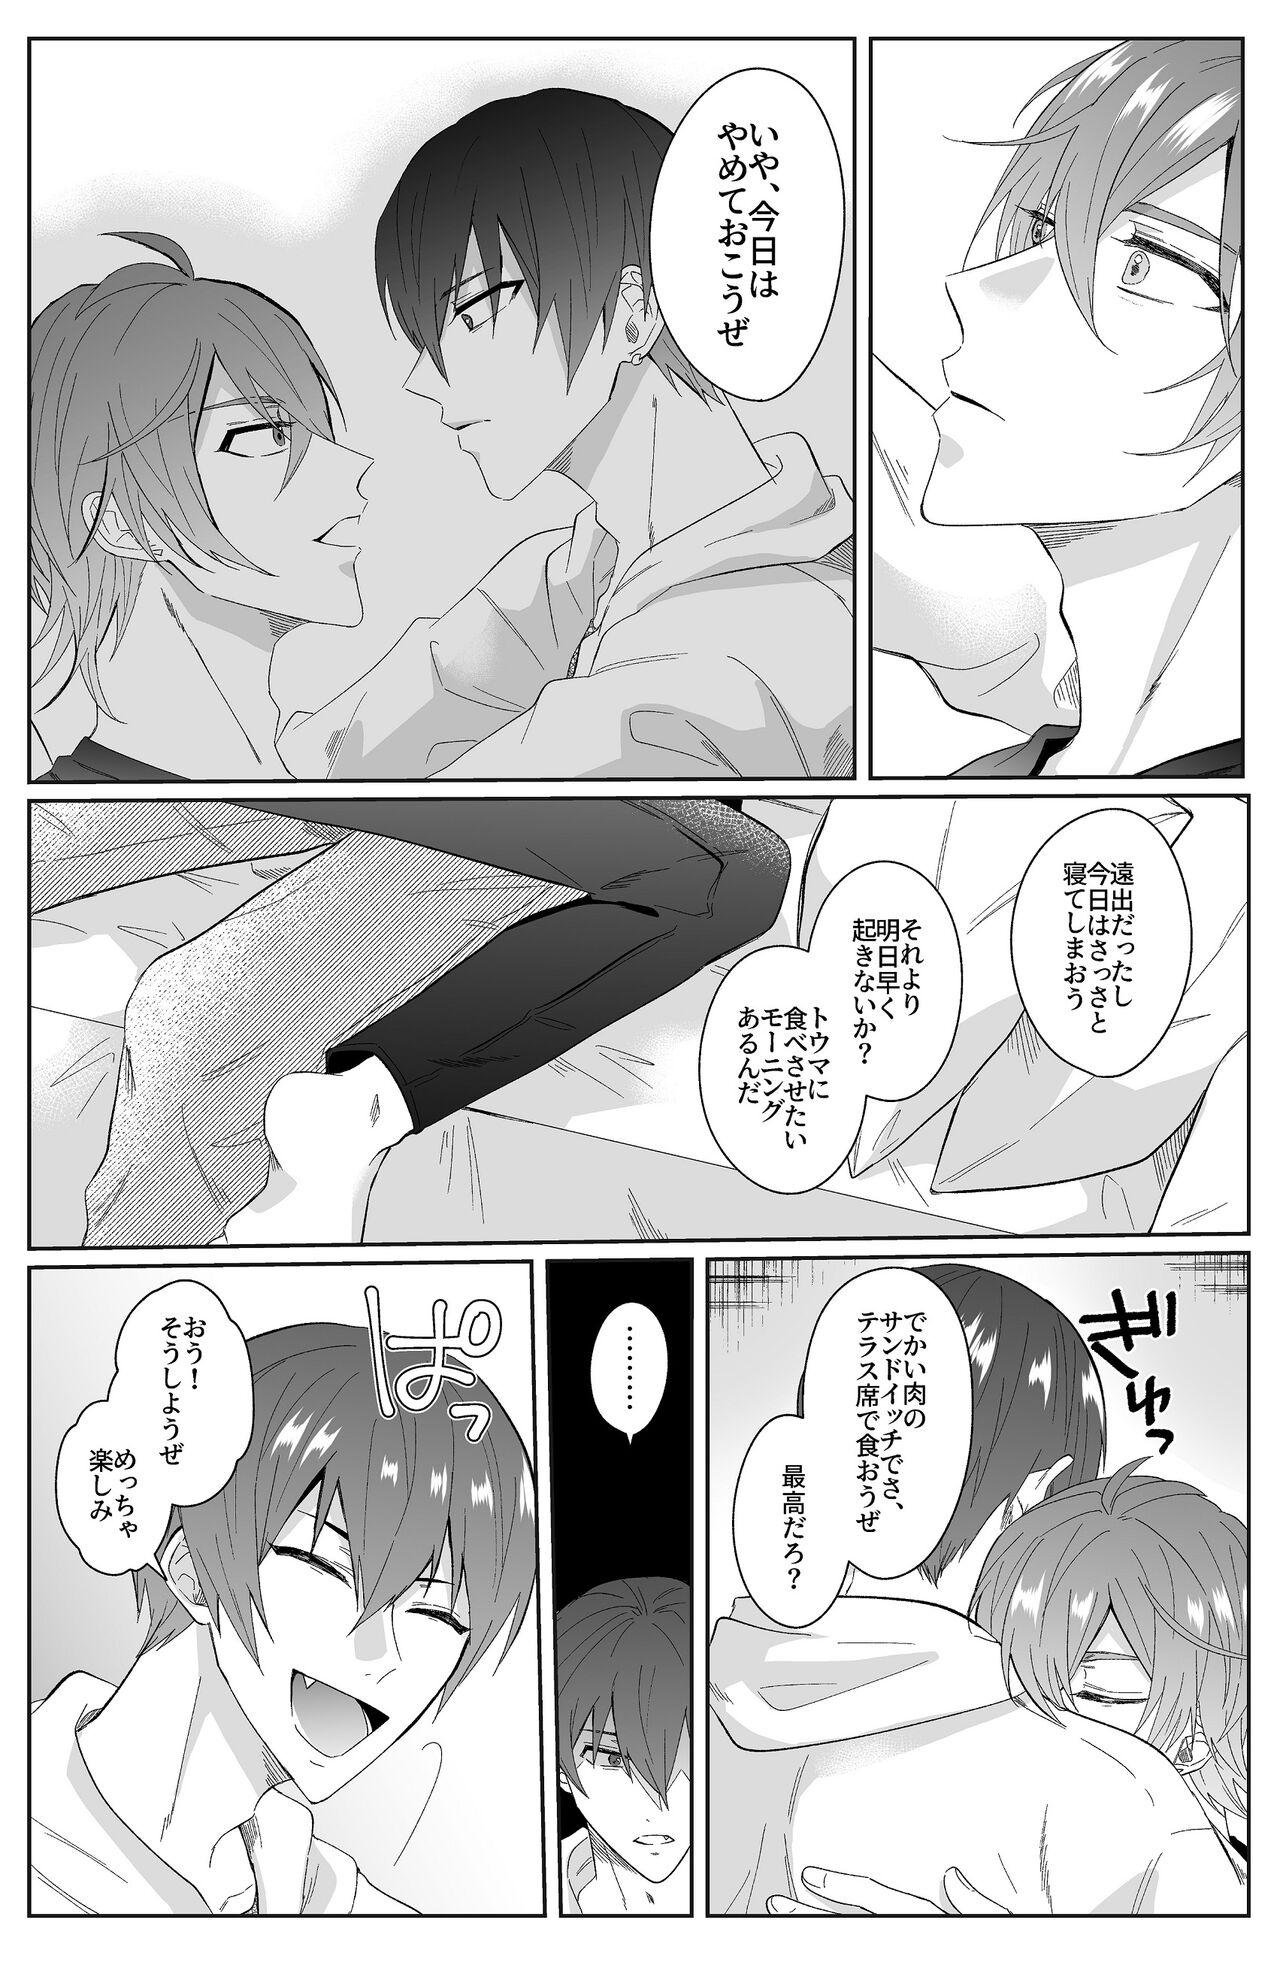 Black Woman Second Attempt - Idolish7 Oral - Page 8